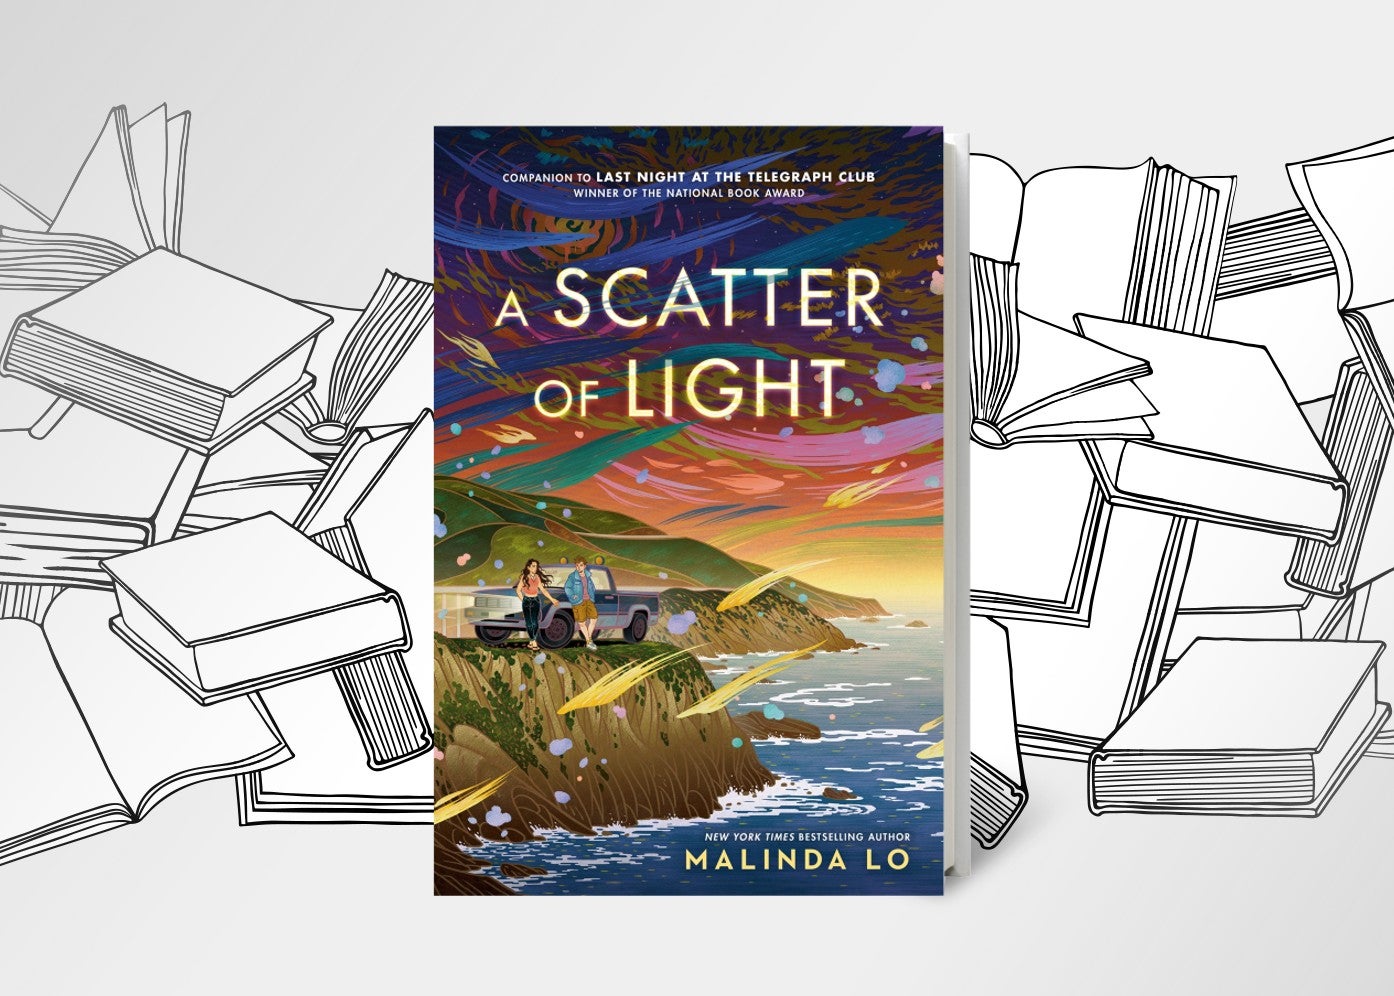 Book Club's next read is 'A Scatter of Light' by Malinda Lo